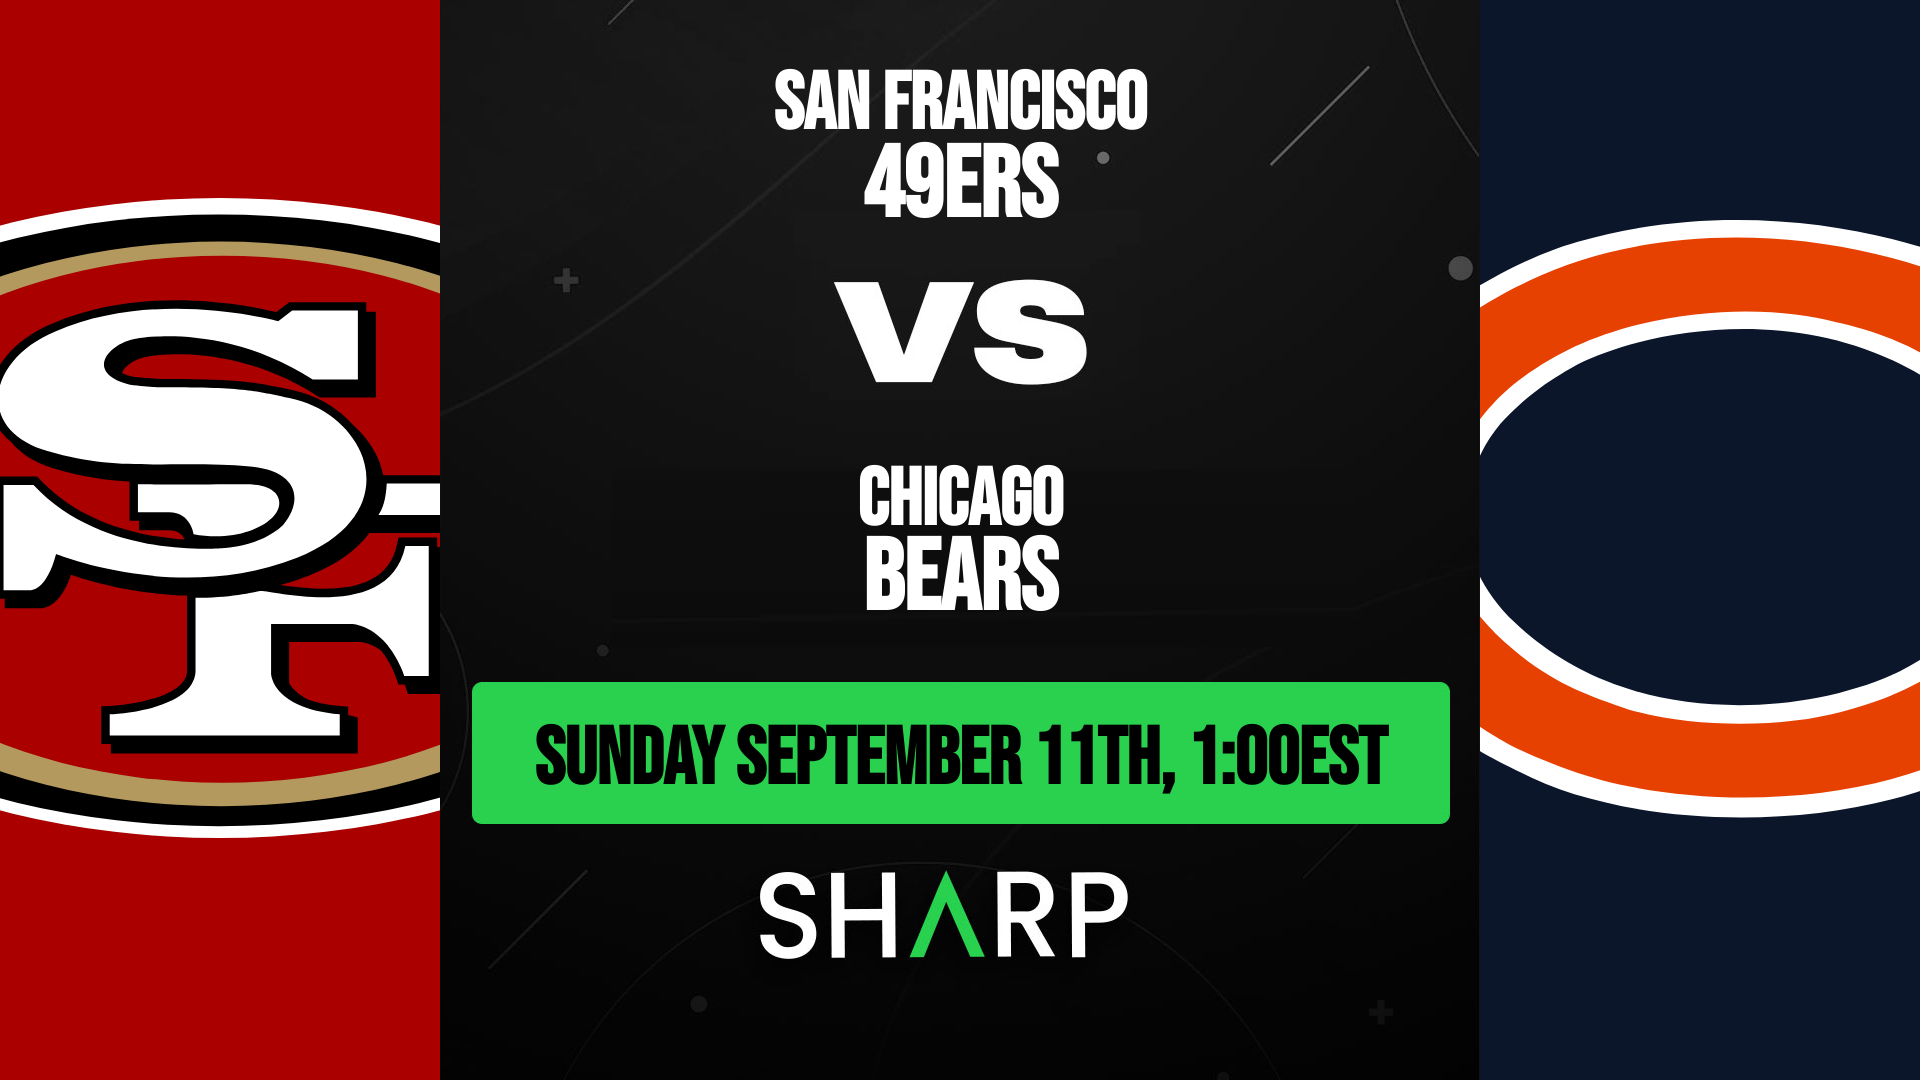 San Francisco 49ers @ Chicago Bears Matchup Preview - September